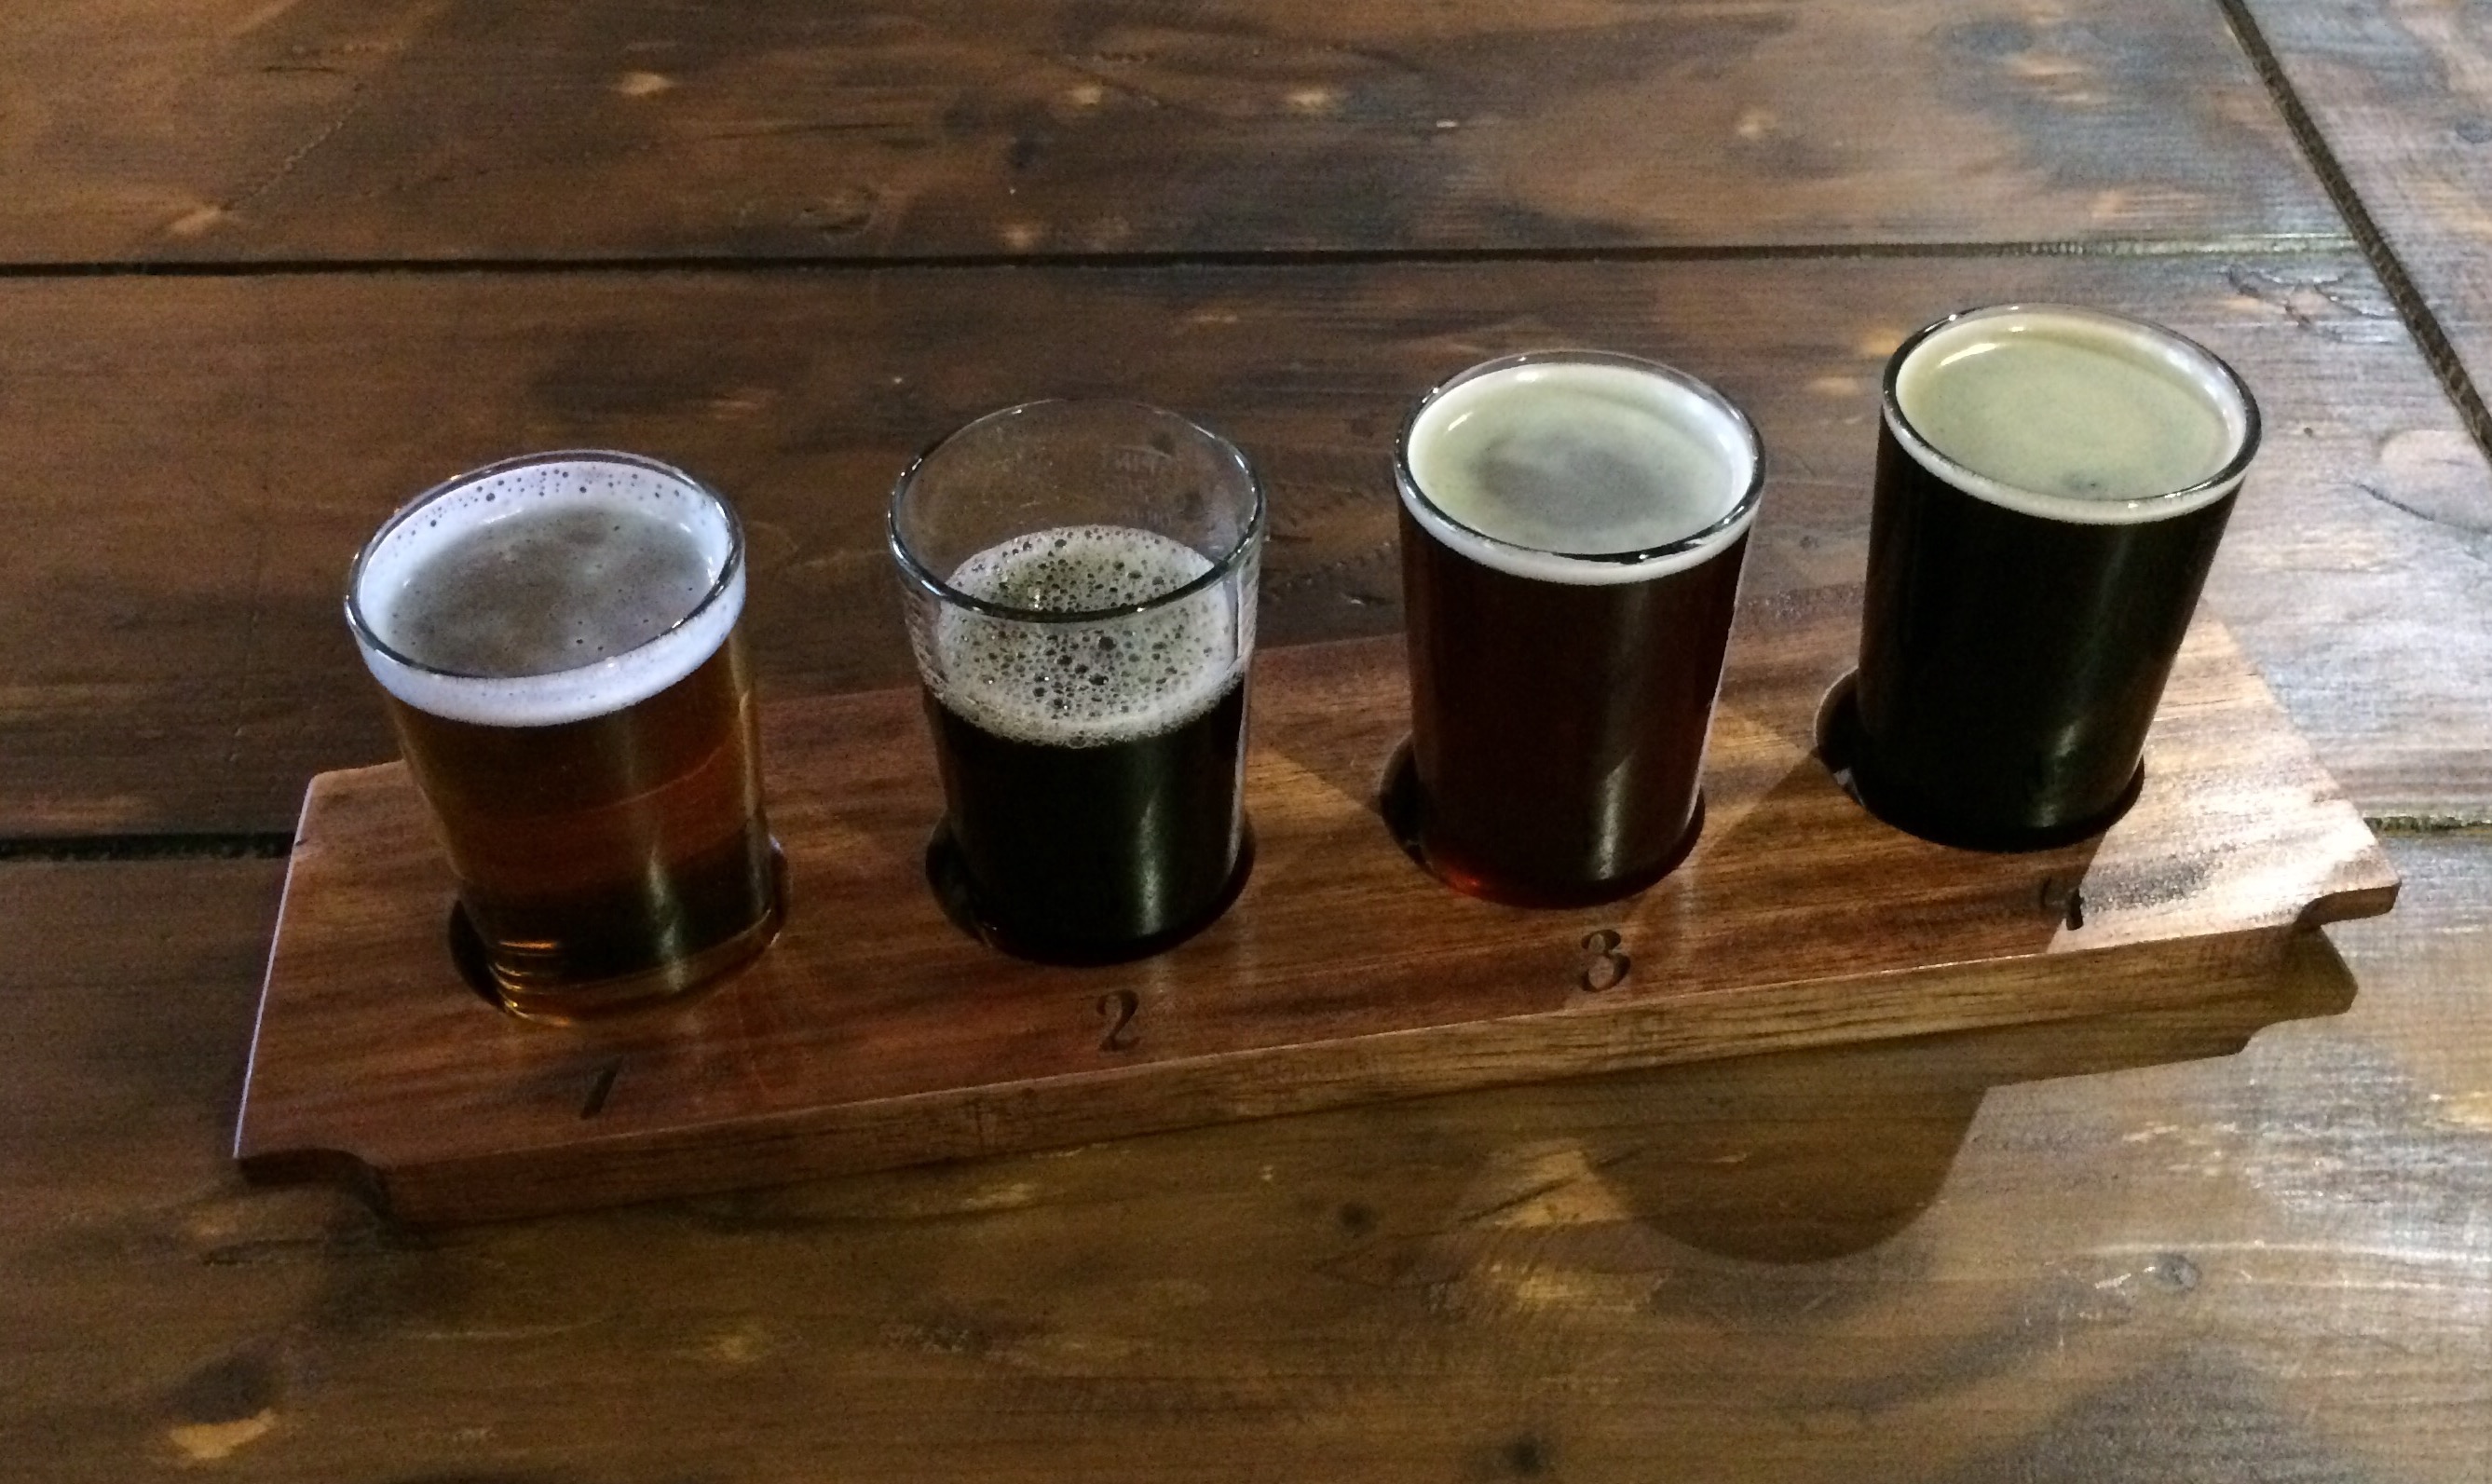 Taster tray at The Open Gate Brewery at St. James's Gate. Tray consisted of Smithwicks Blonde Ale, OGB Barrel Beer, OGB Imperial Dunkel Weisse, and OGB Milk Stout while on a trip to Guinness.